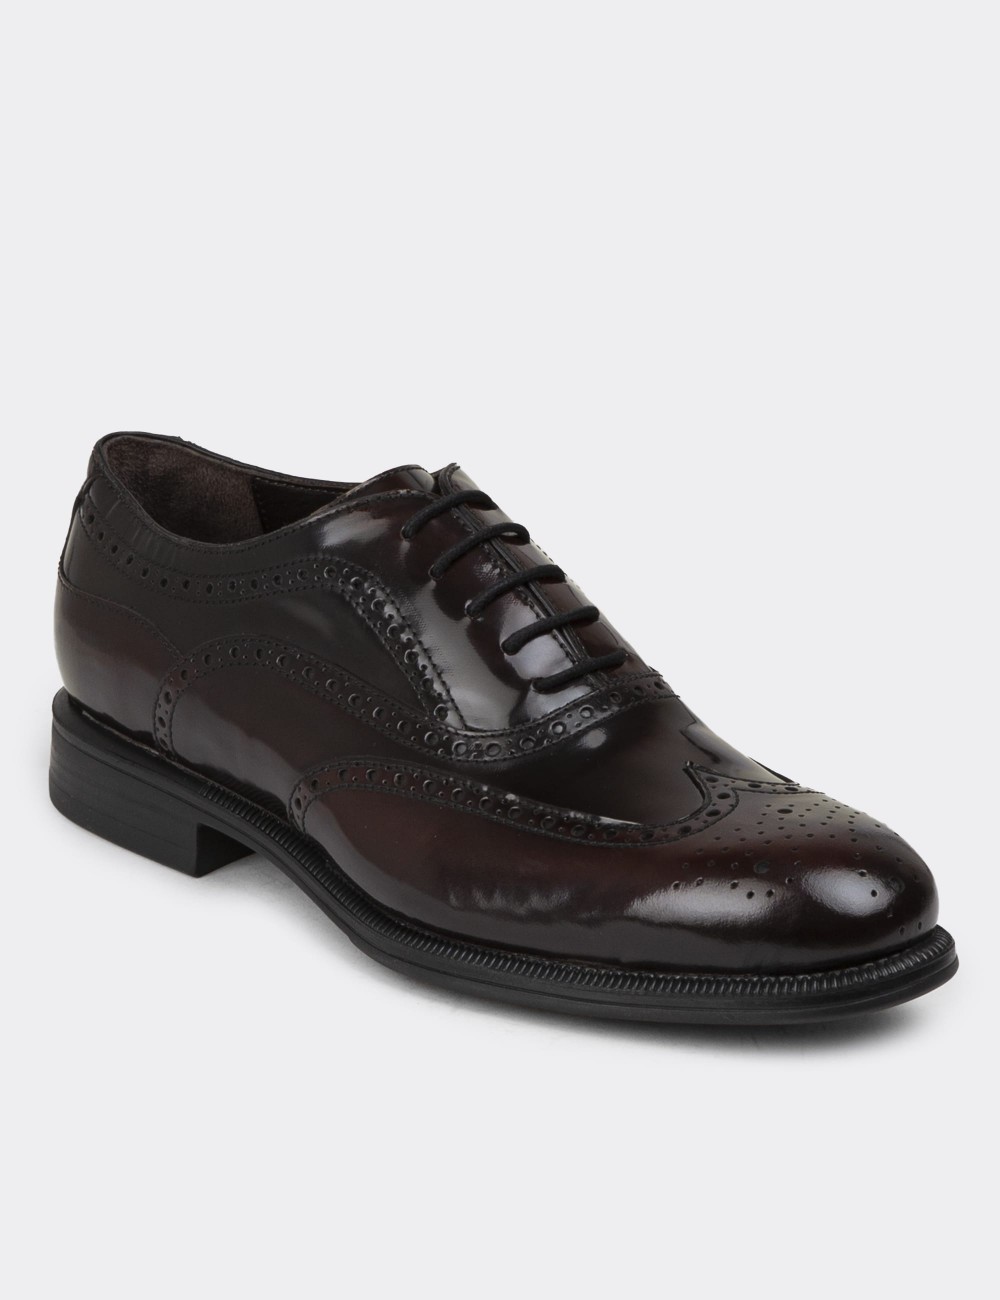 Burgundy Leather Classic Shoes - 01511MBRDC02